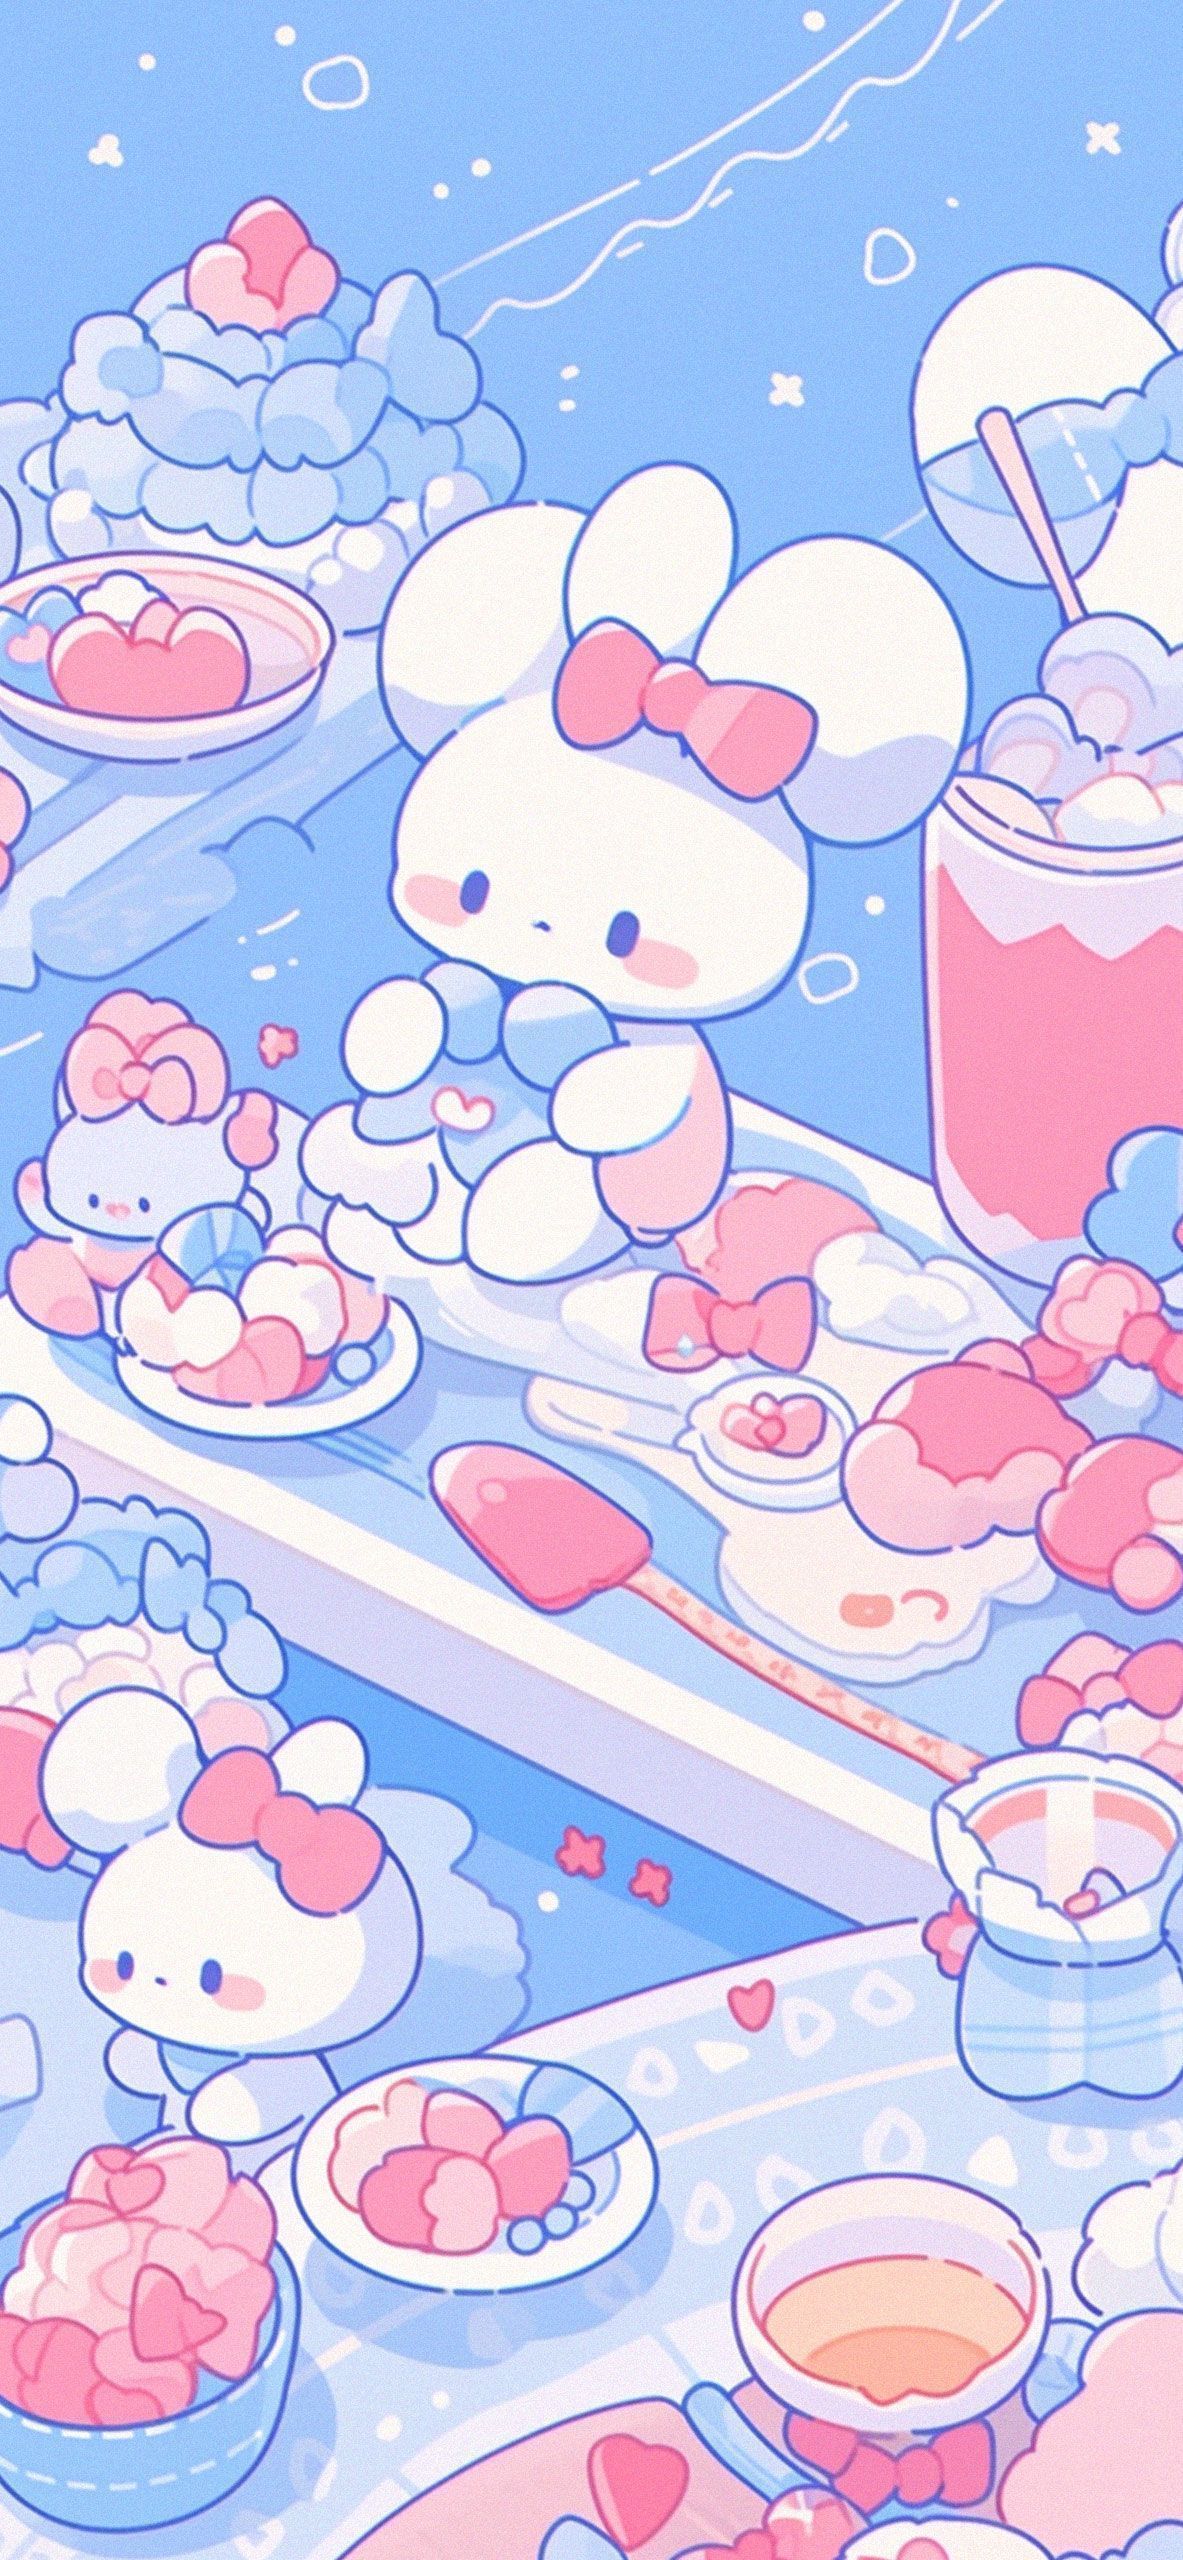 A phone wallpaper of a cute pink mouse surrounded by desserts - Cinnamoroll, Sanrio